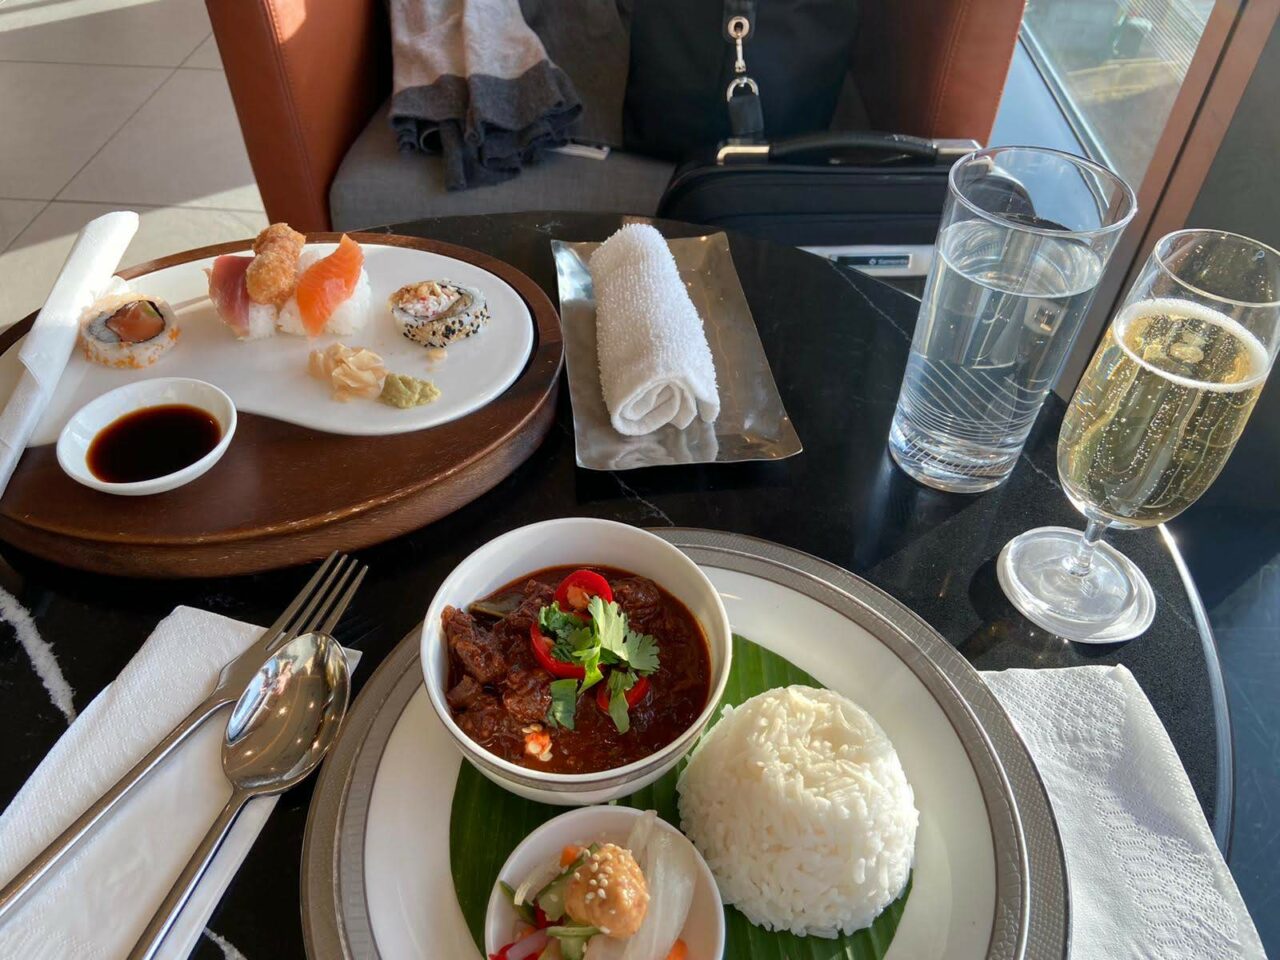 Food at Singapore First Class Lounge 